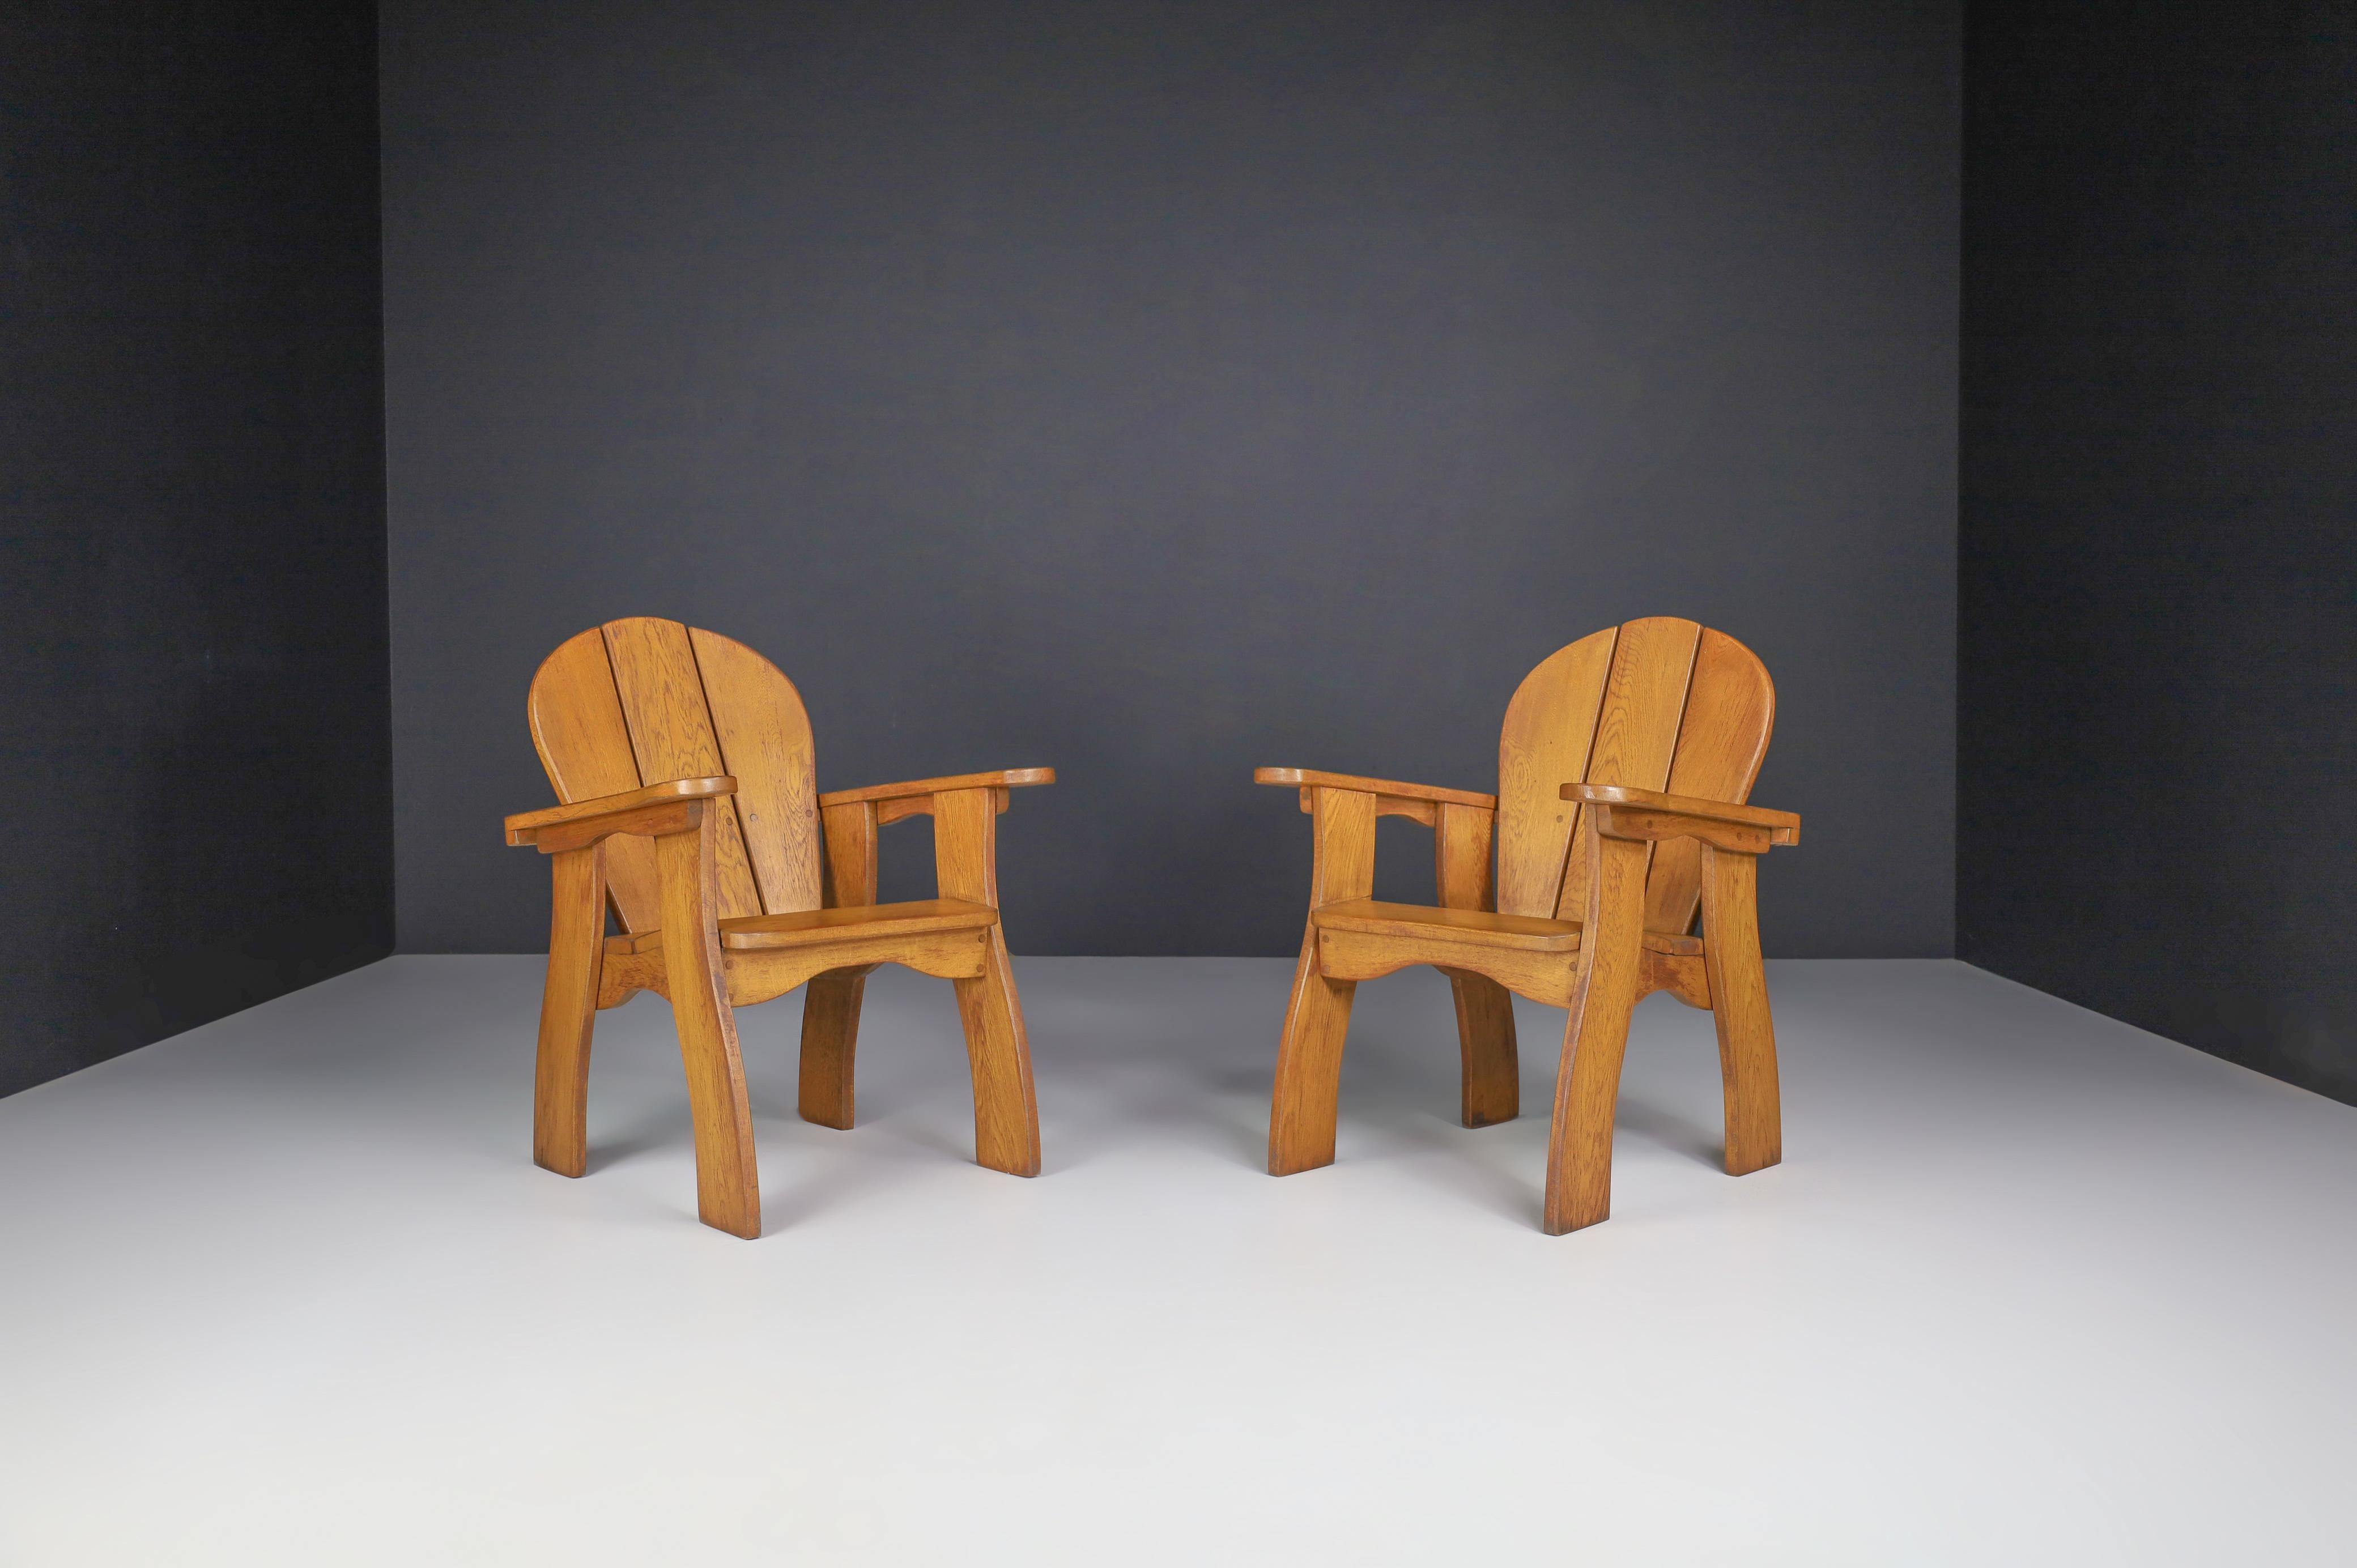 Set of two sculptural armchairs in oak, France, 1960s.

Set of two sculptural armchairs, these chairs are made of French oak and sculpturally crafted by hand in France in the 1960s. The craftsmanship is still visible; they are made of solid oak